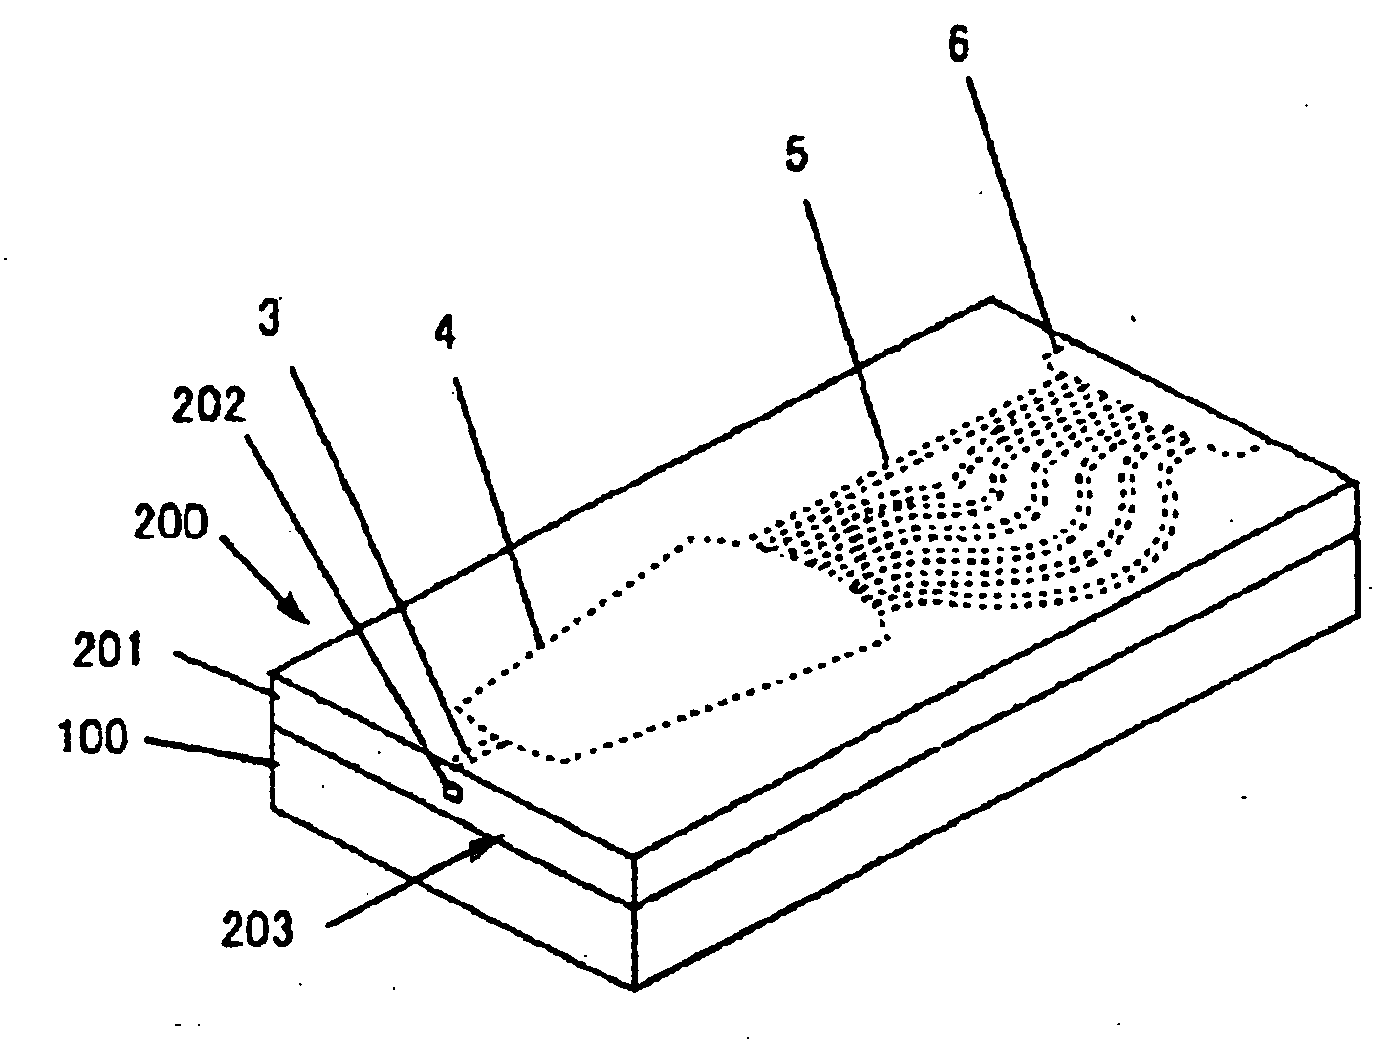 Optical device with slab waveguide and channel waveguides on substrate